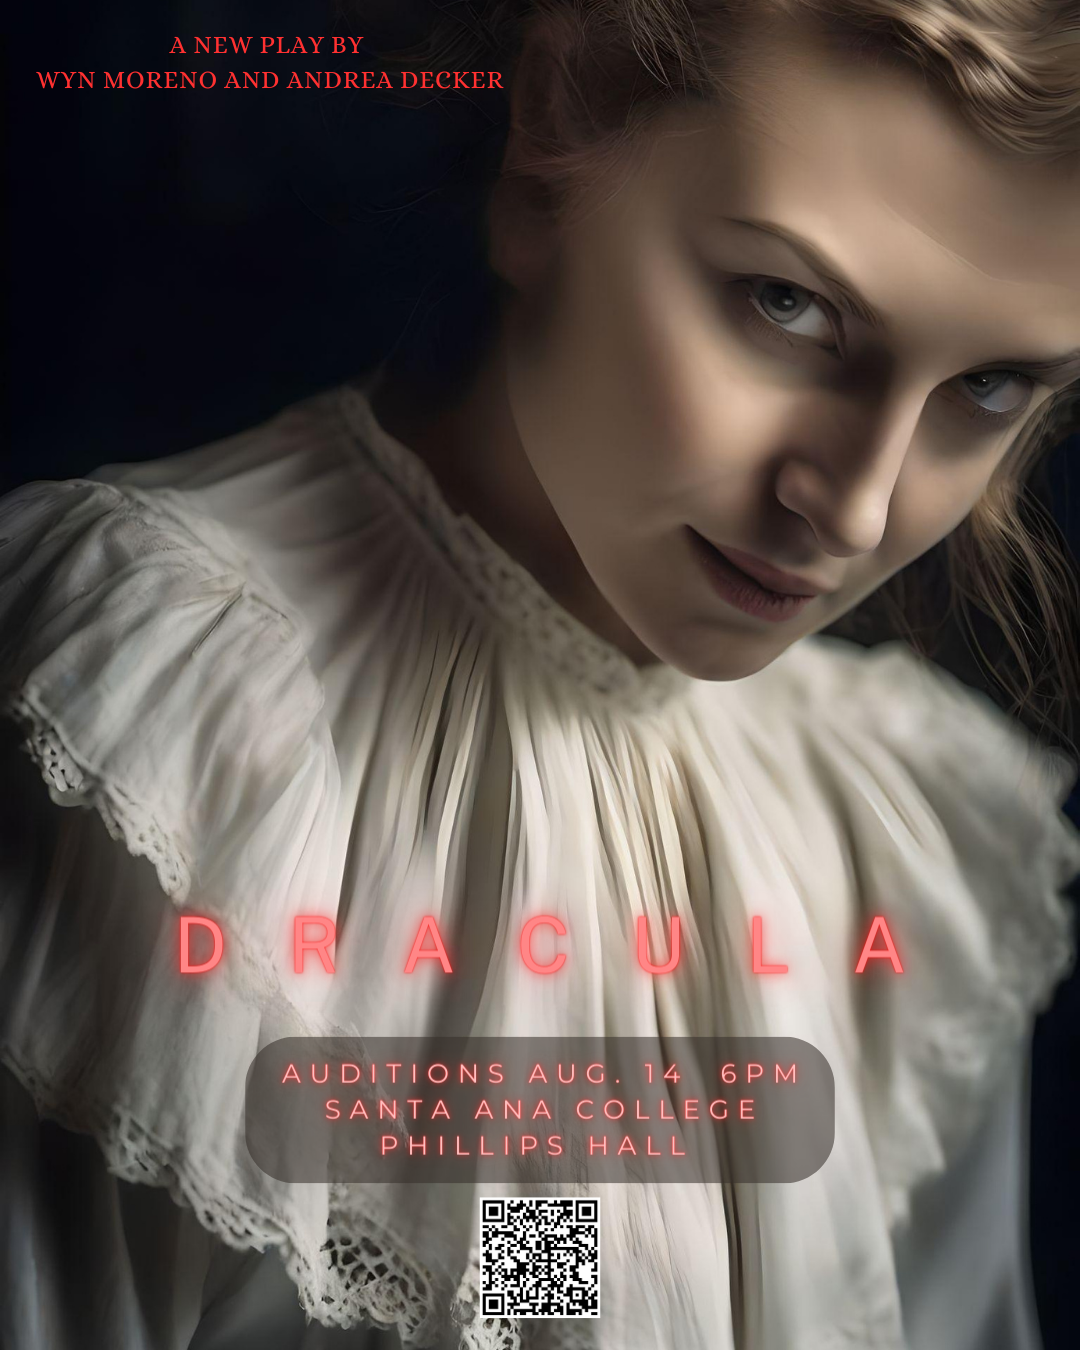 BRITISH WOMAN IN VINTAGE DRESS WITH CAPTION,  "DRACULA AUDITIONS AUGUST 14 6PM  SANTA ANA COLLEGE